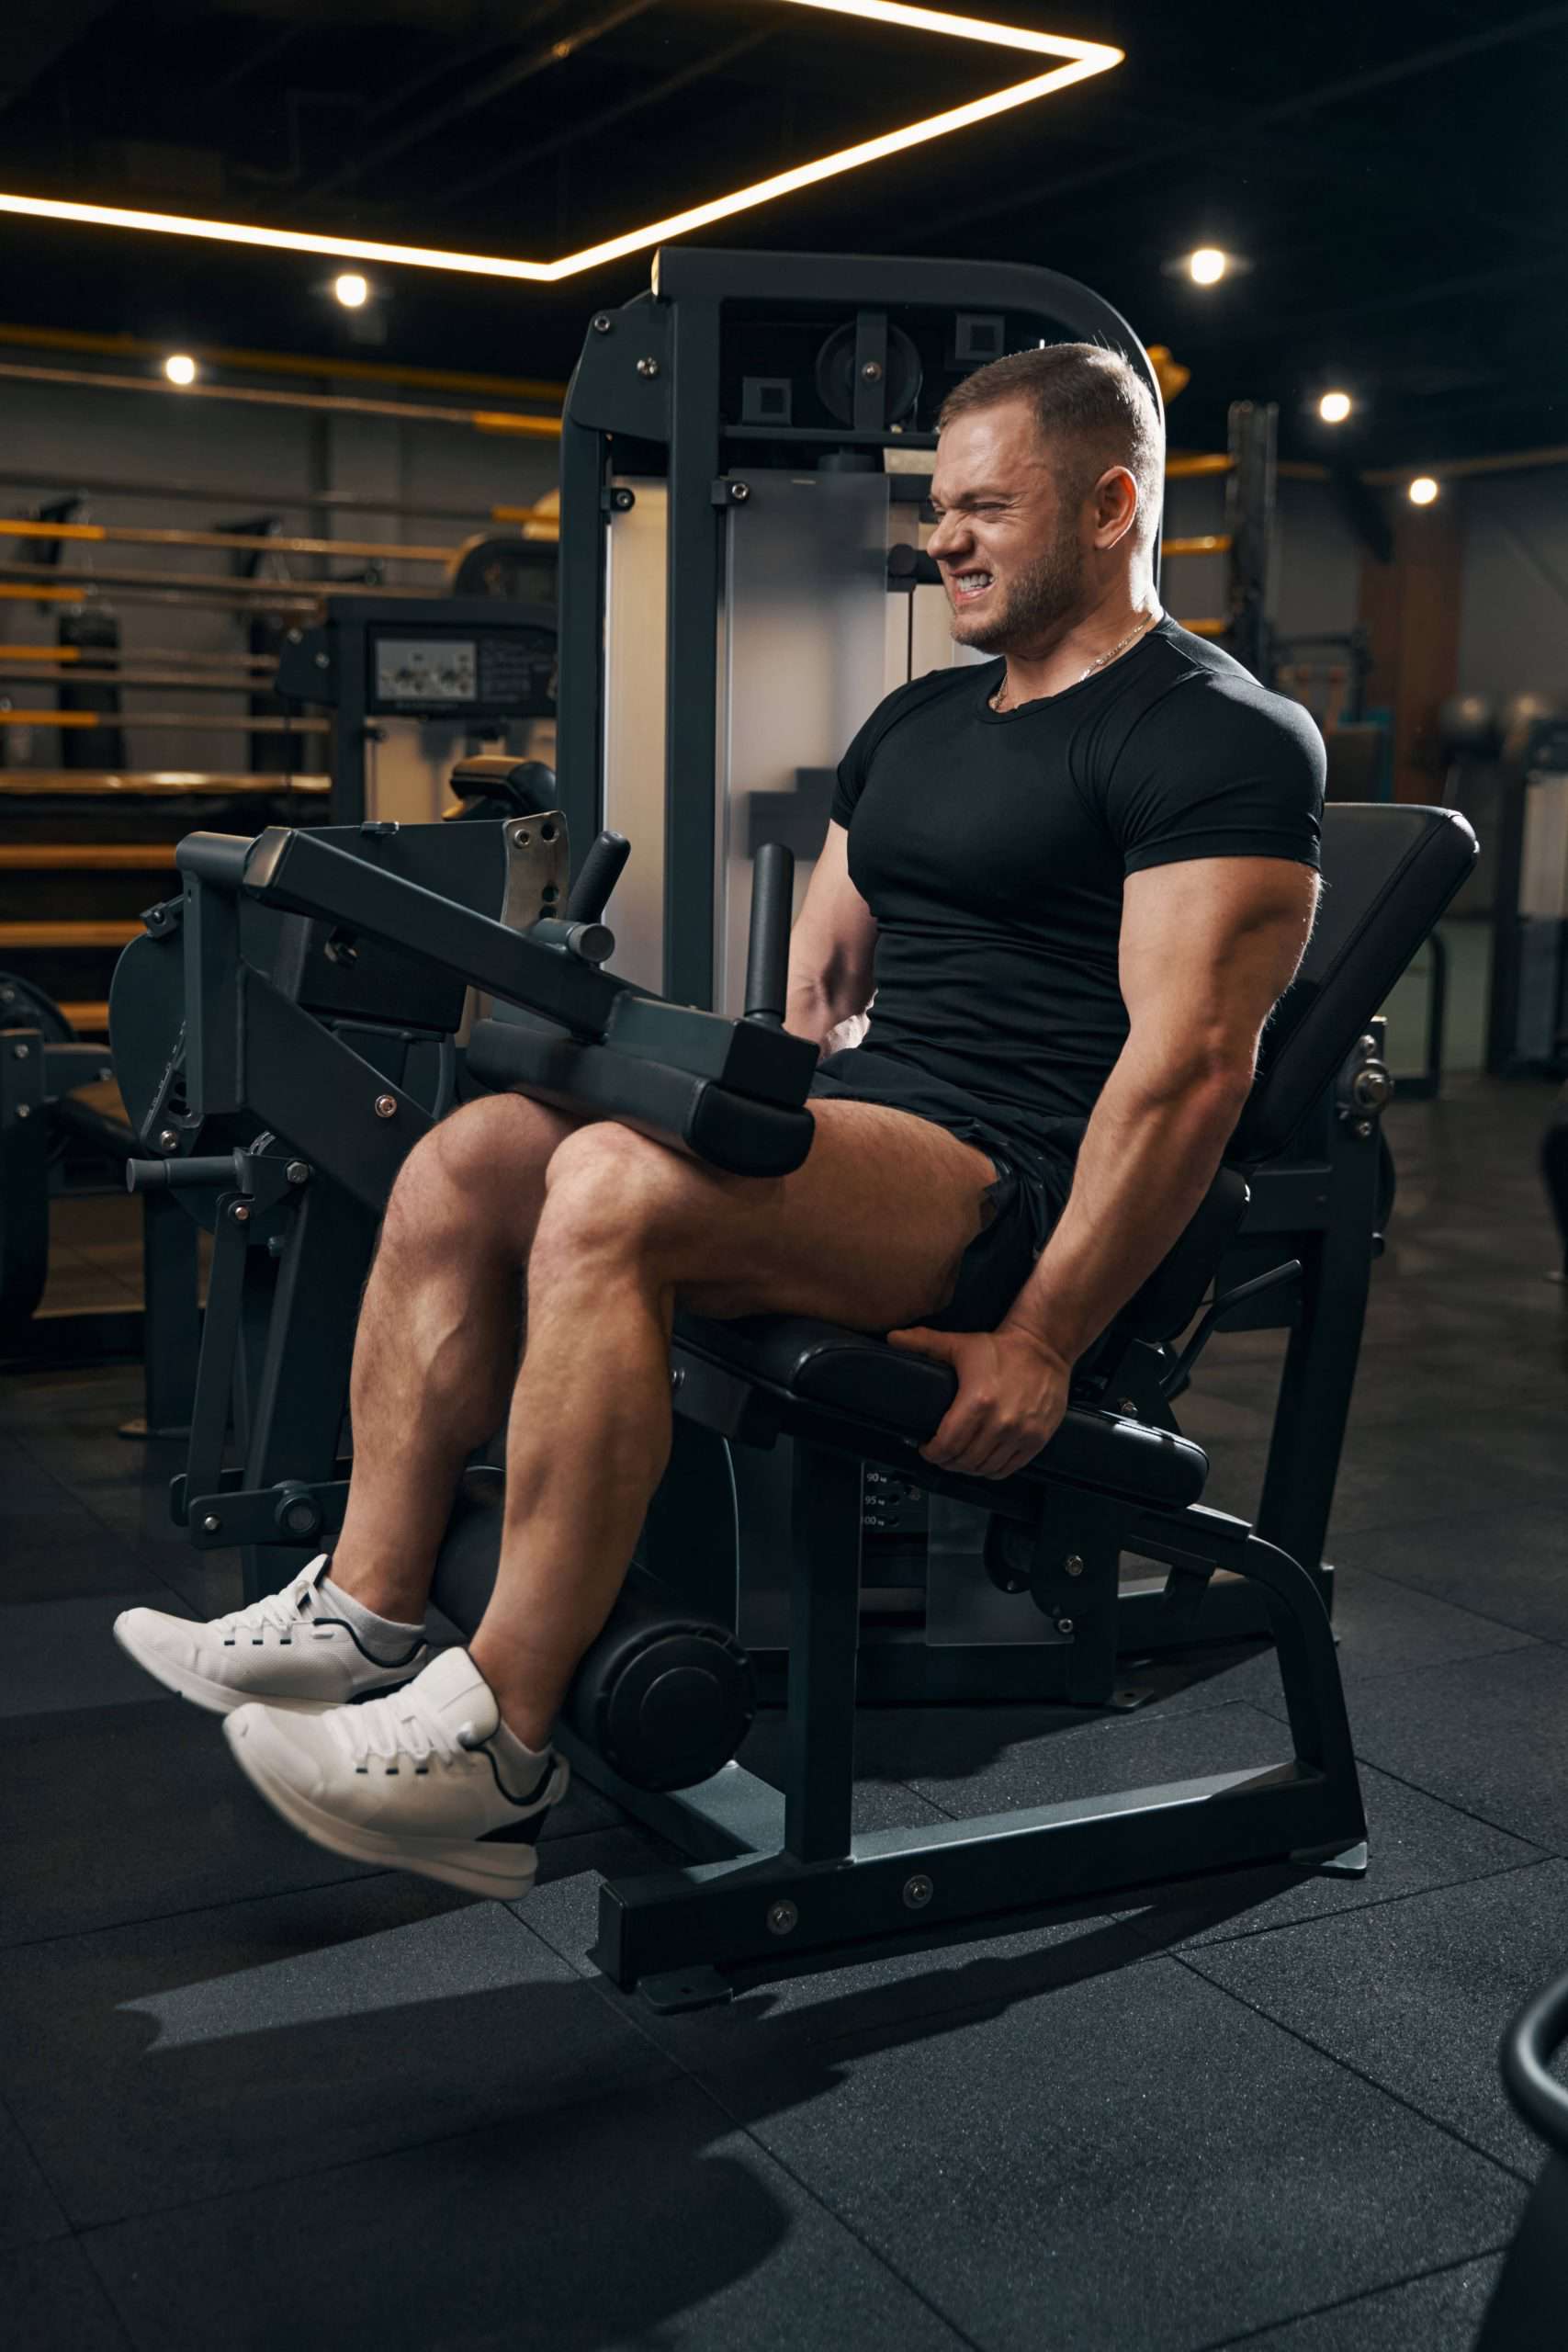 How to perform the Leg Curl correctly